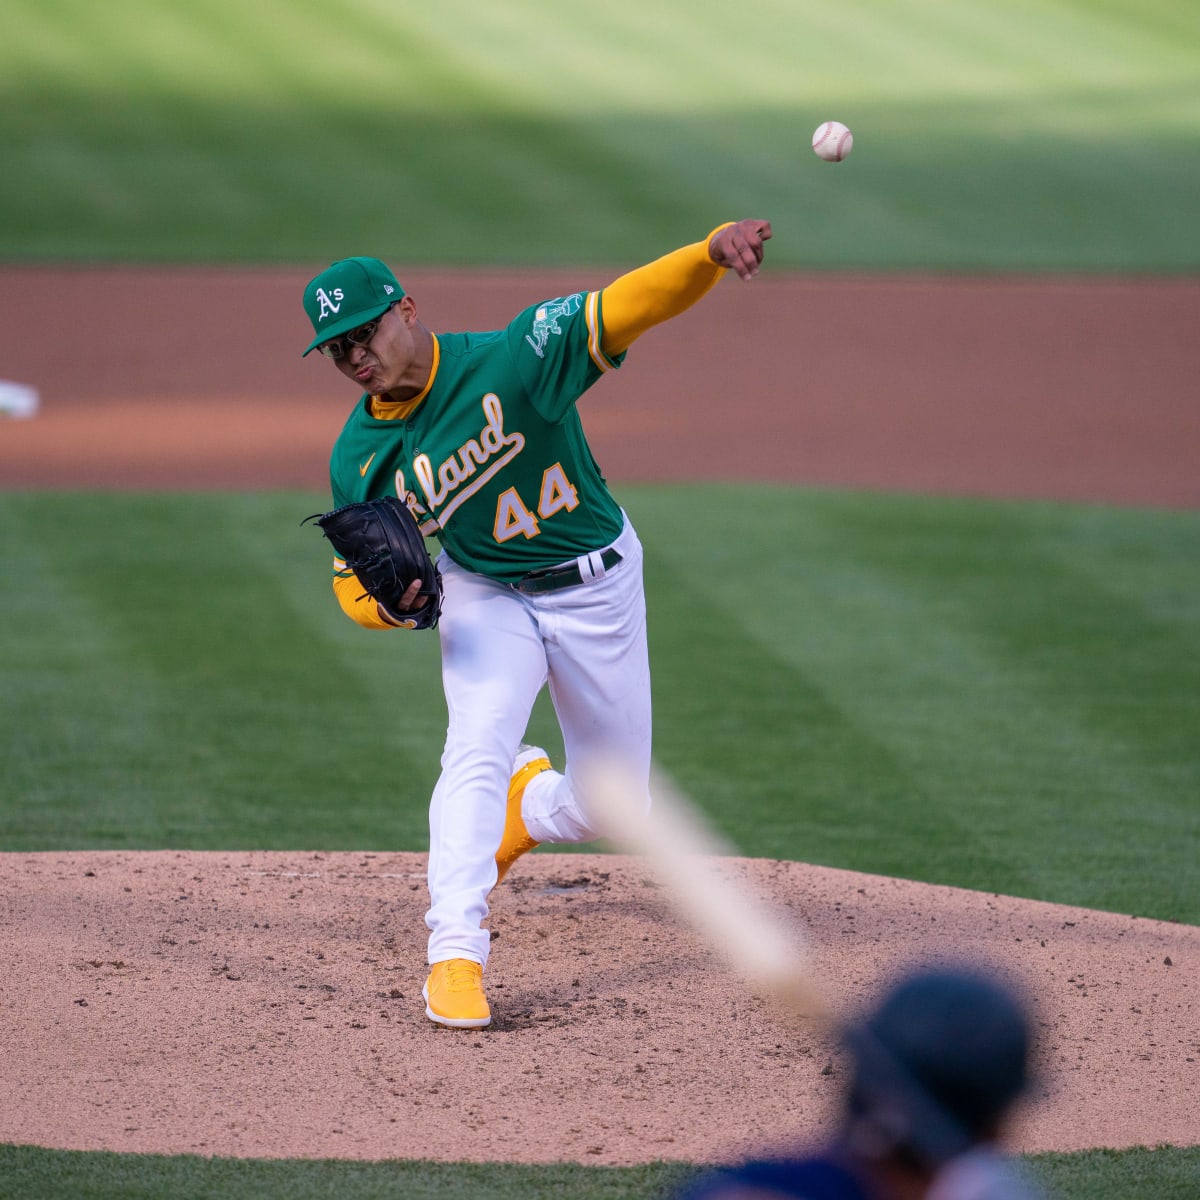 Oakland Athletics pitcher breaks finger playing video game